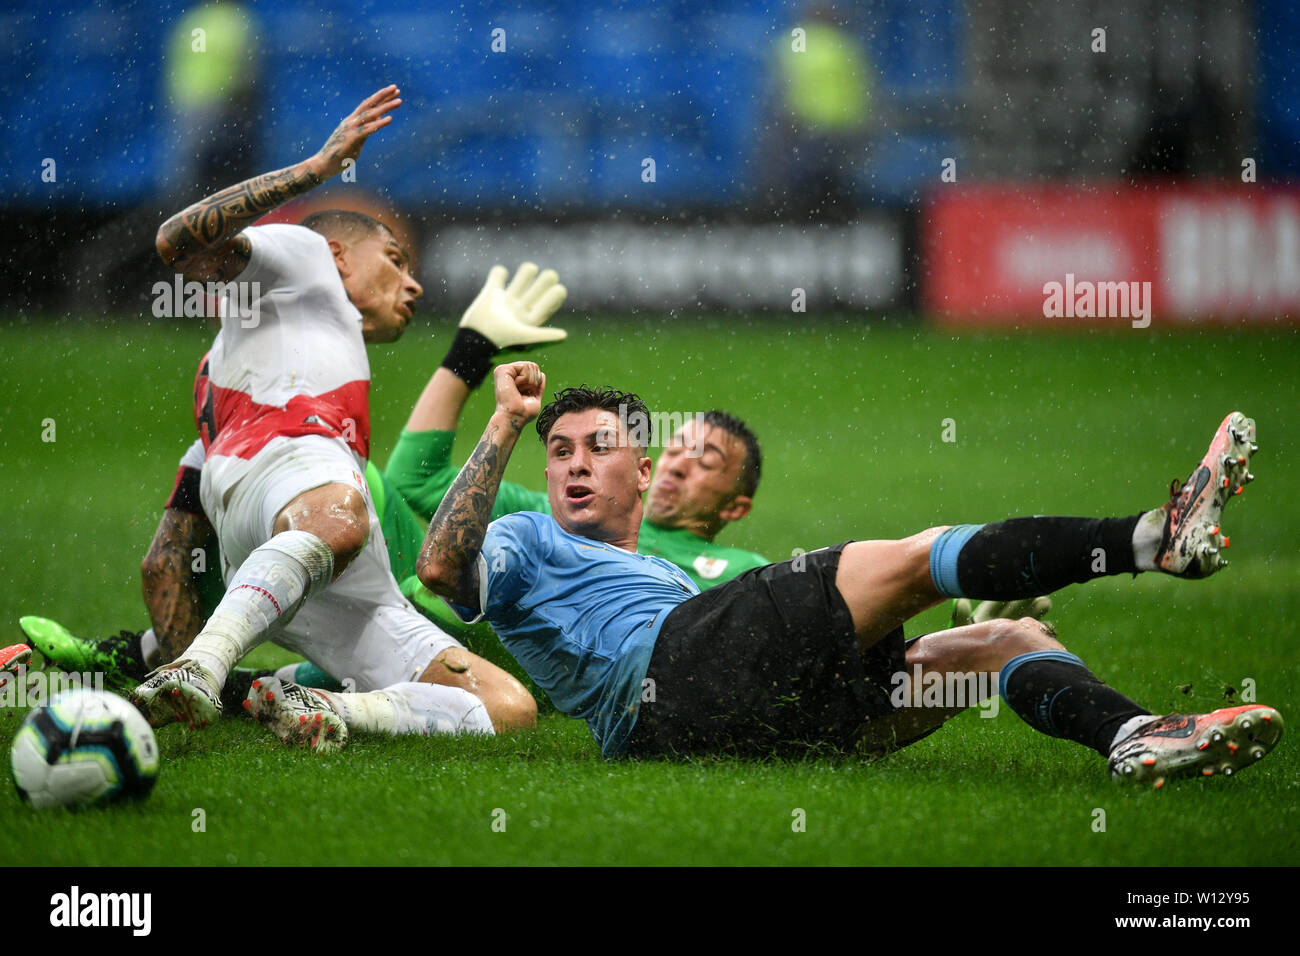 Salvador, Brazil. 29th June, 2019. Uruguay's Jose Maria Gimenez (R) vies with Paolo Guerrero (L) of Peru during the Copa America 2019 quarterfinal match between Uruguay and Peru in Salvador, Brazil, June 29, 2019. Peru won 5-4 in penalty shoot-out. Credit: Xin Yuewei/Xinhua/Alamy Live News Stock Photo